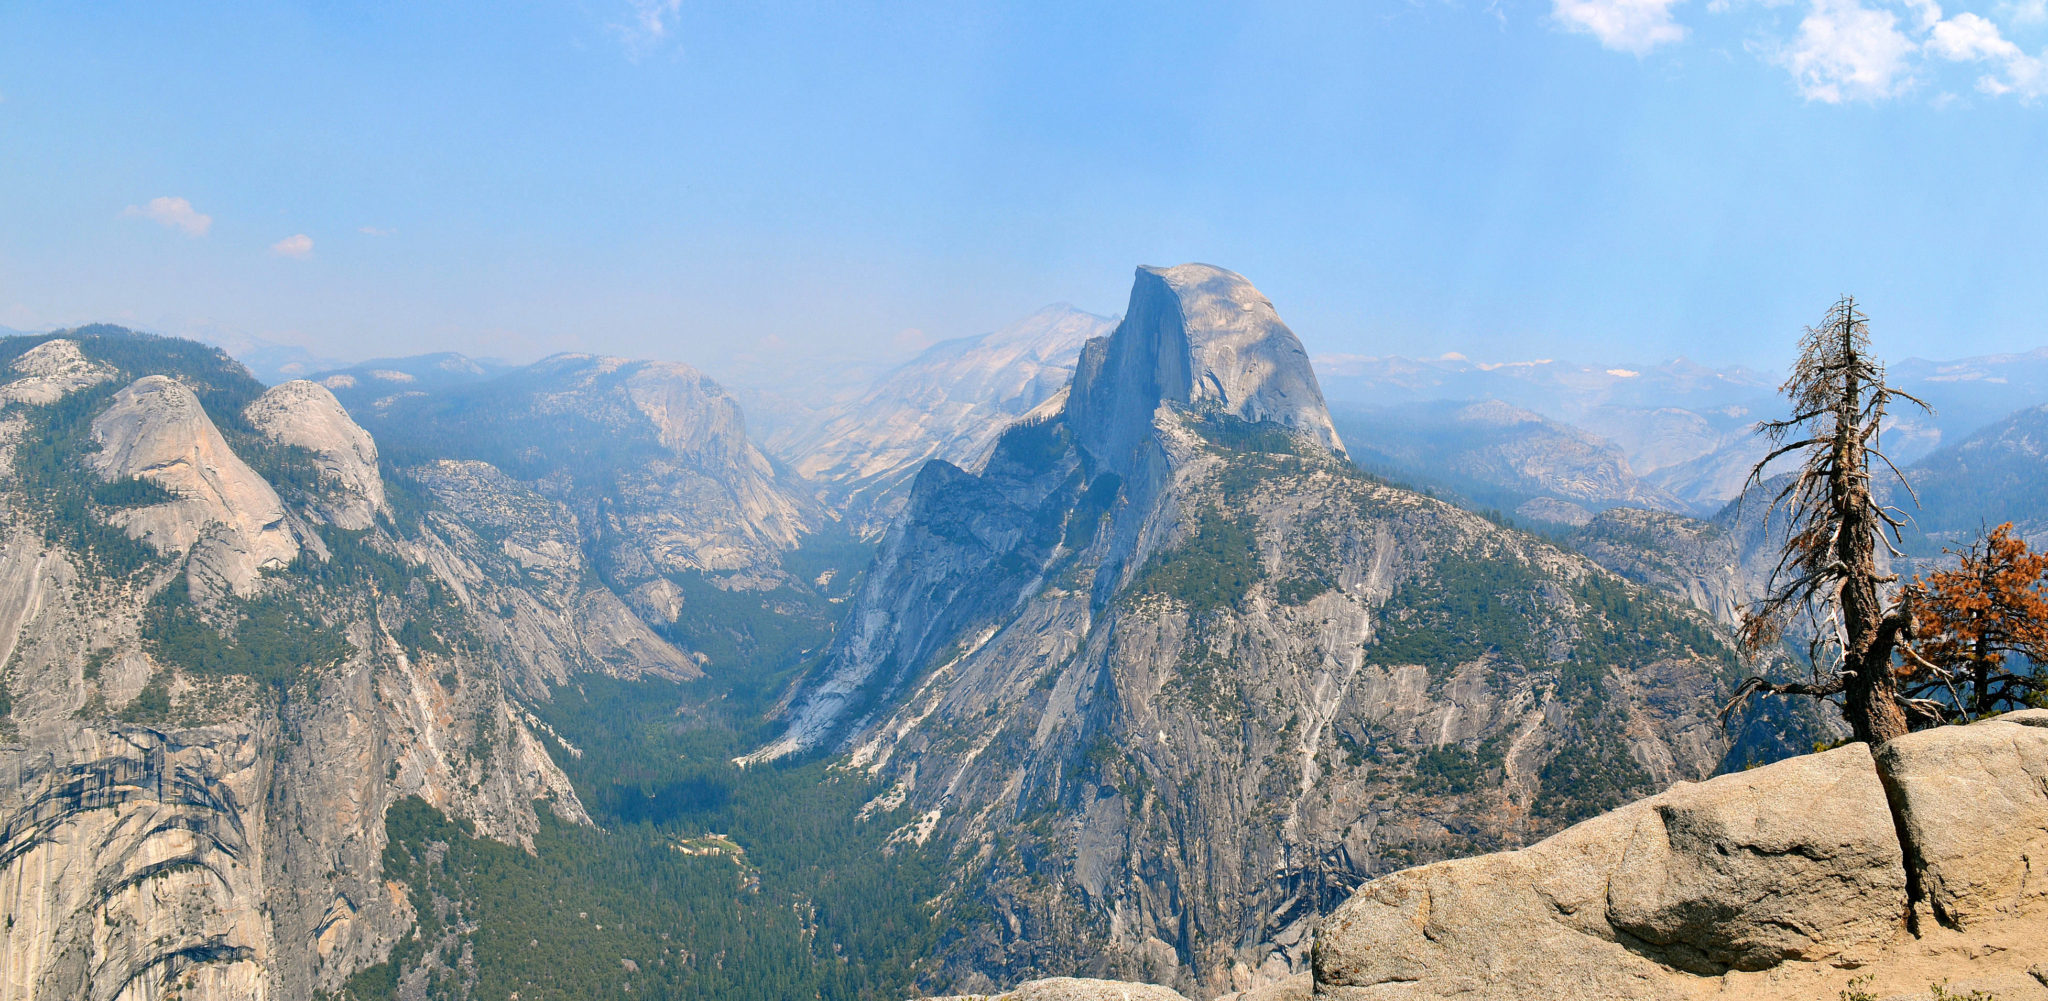 View of Yosemite Valley and Half Dome from Glacier Point